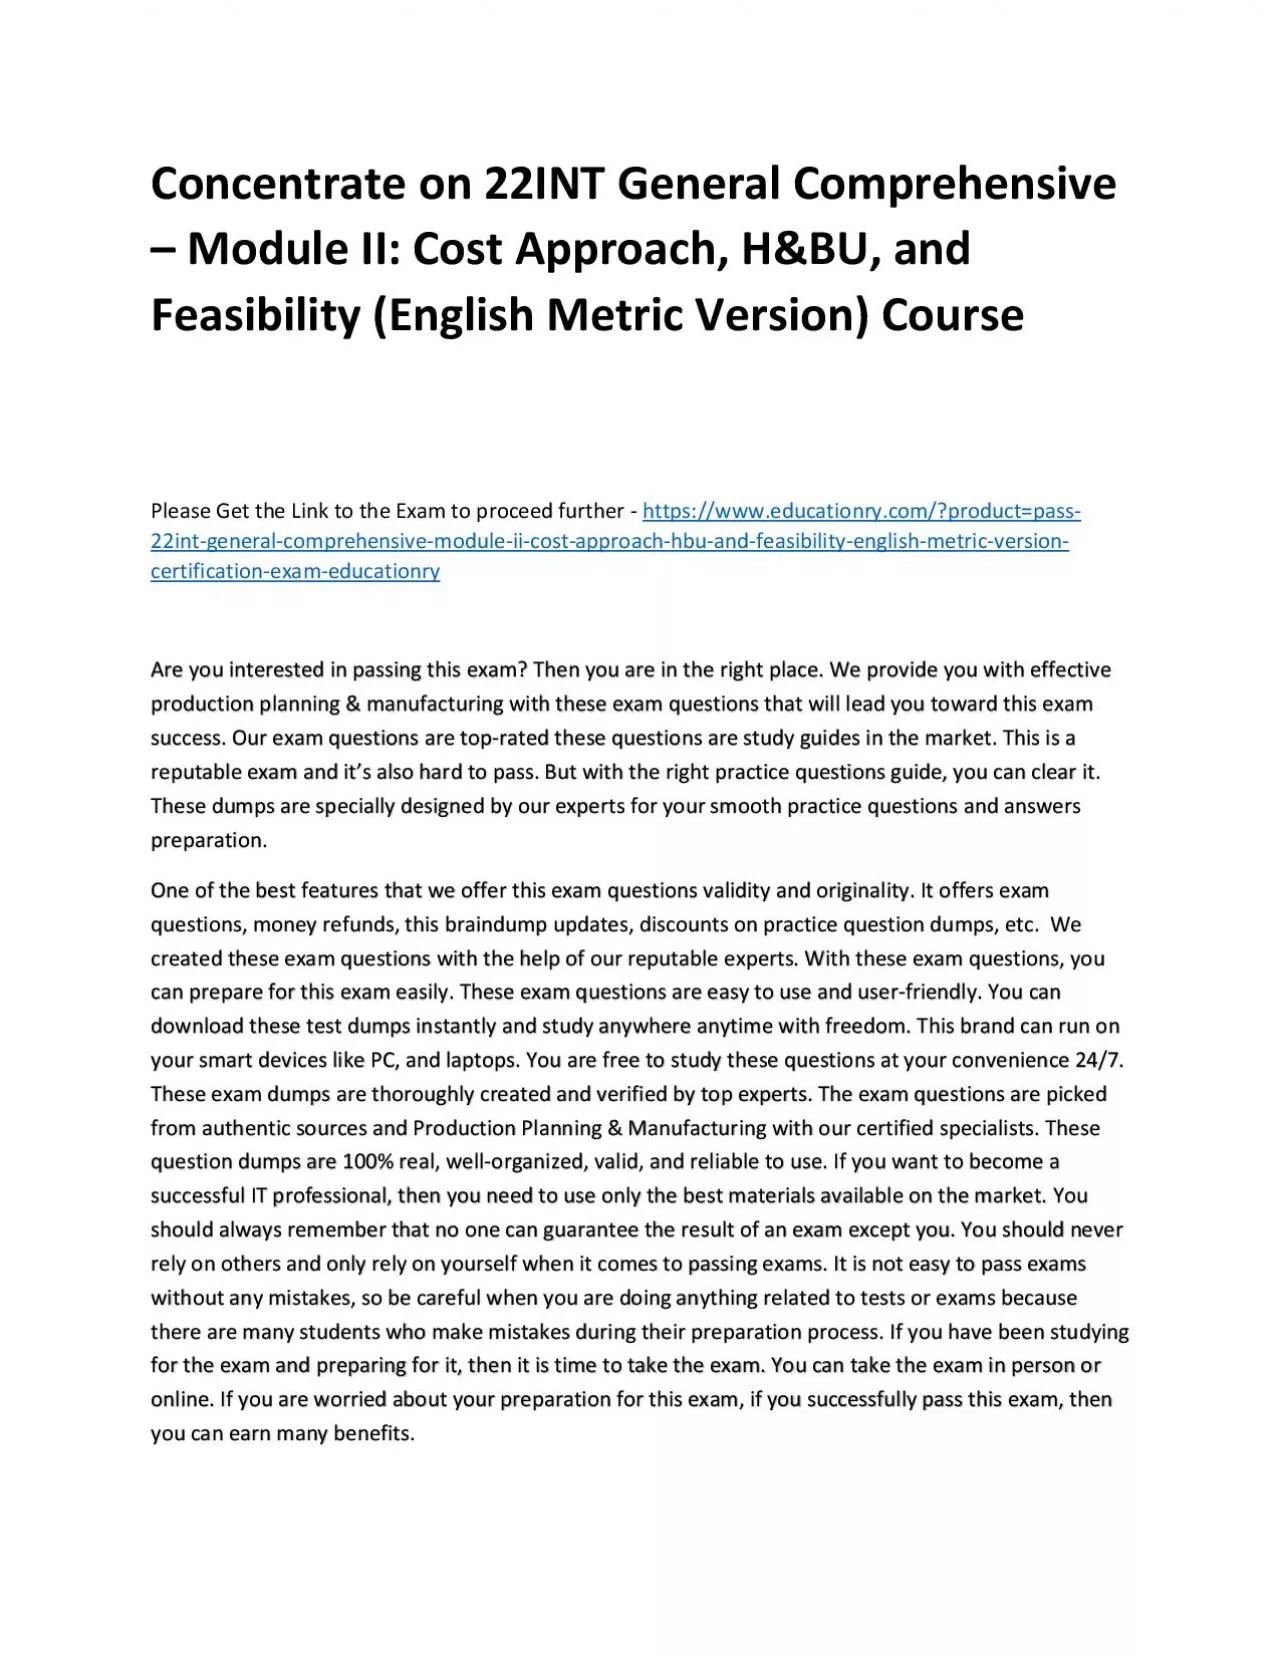 Concentrate on 22INT General Comprehensive – Module II: Cost Approach, H&BU, and Feasibility